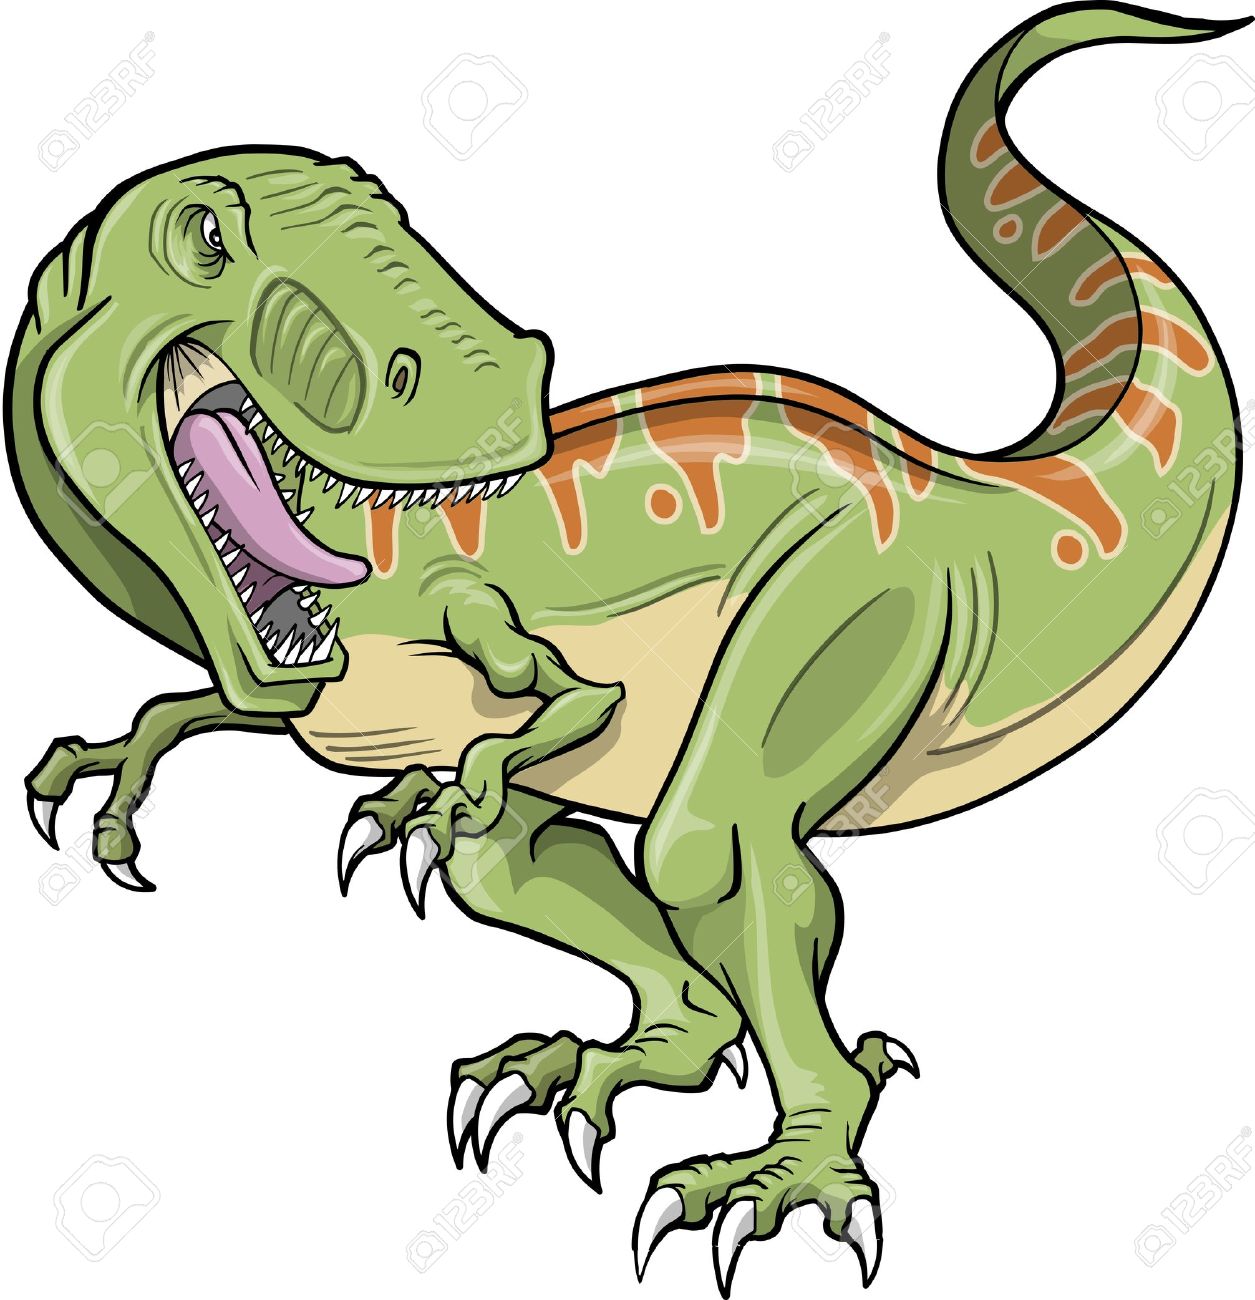 T rex free download. Trex clipart real dinosaur